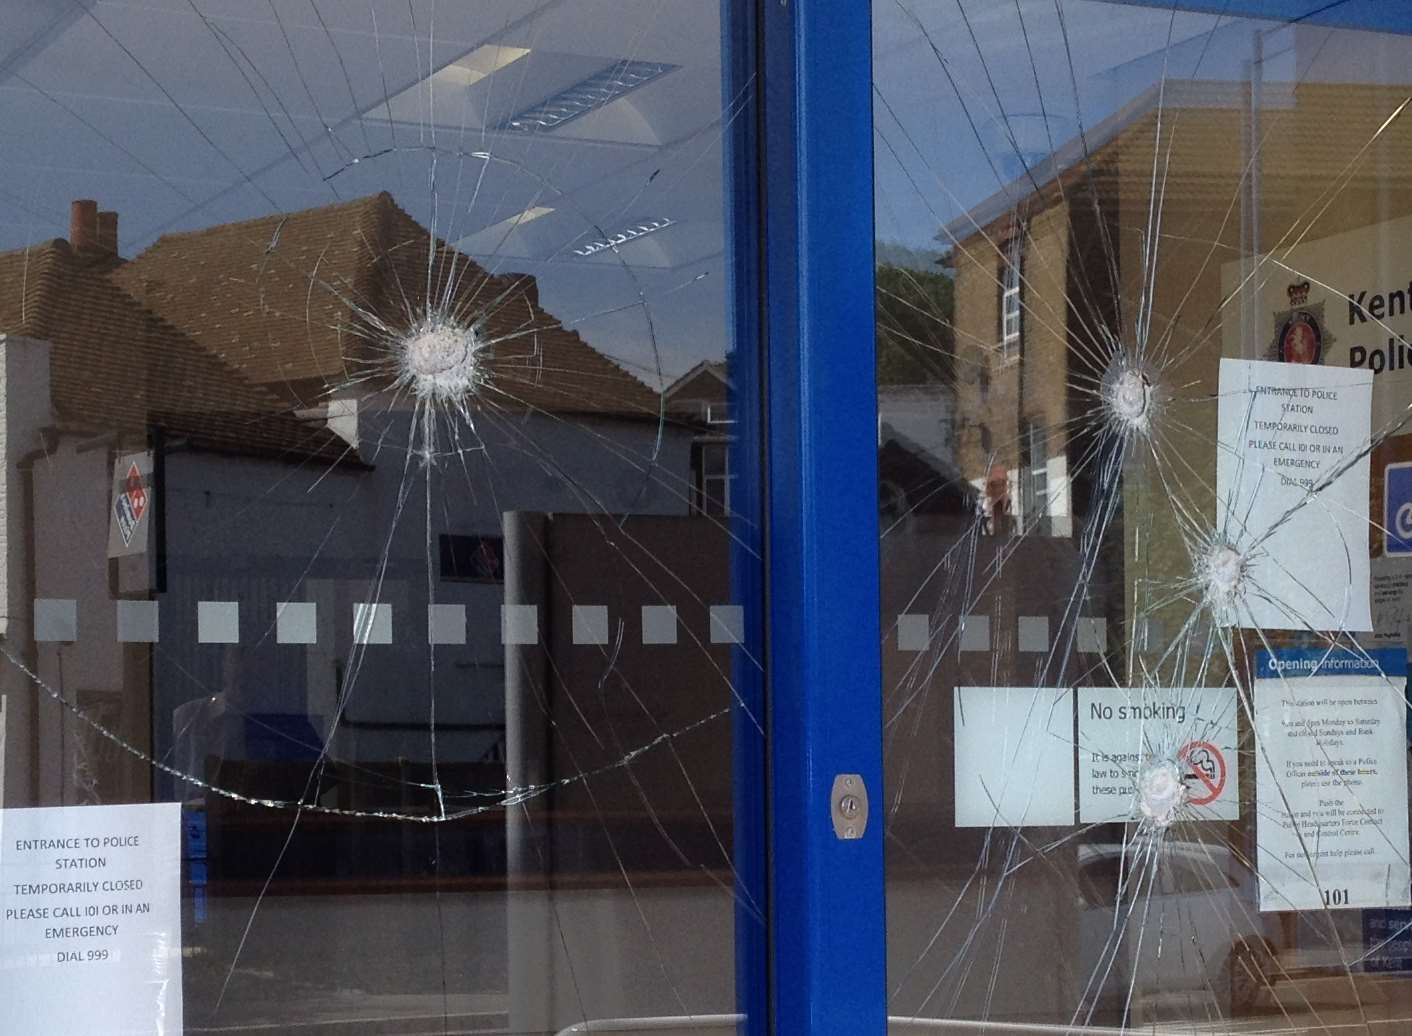 The damage to the glass at Sheerness police station